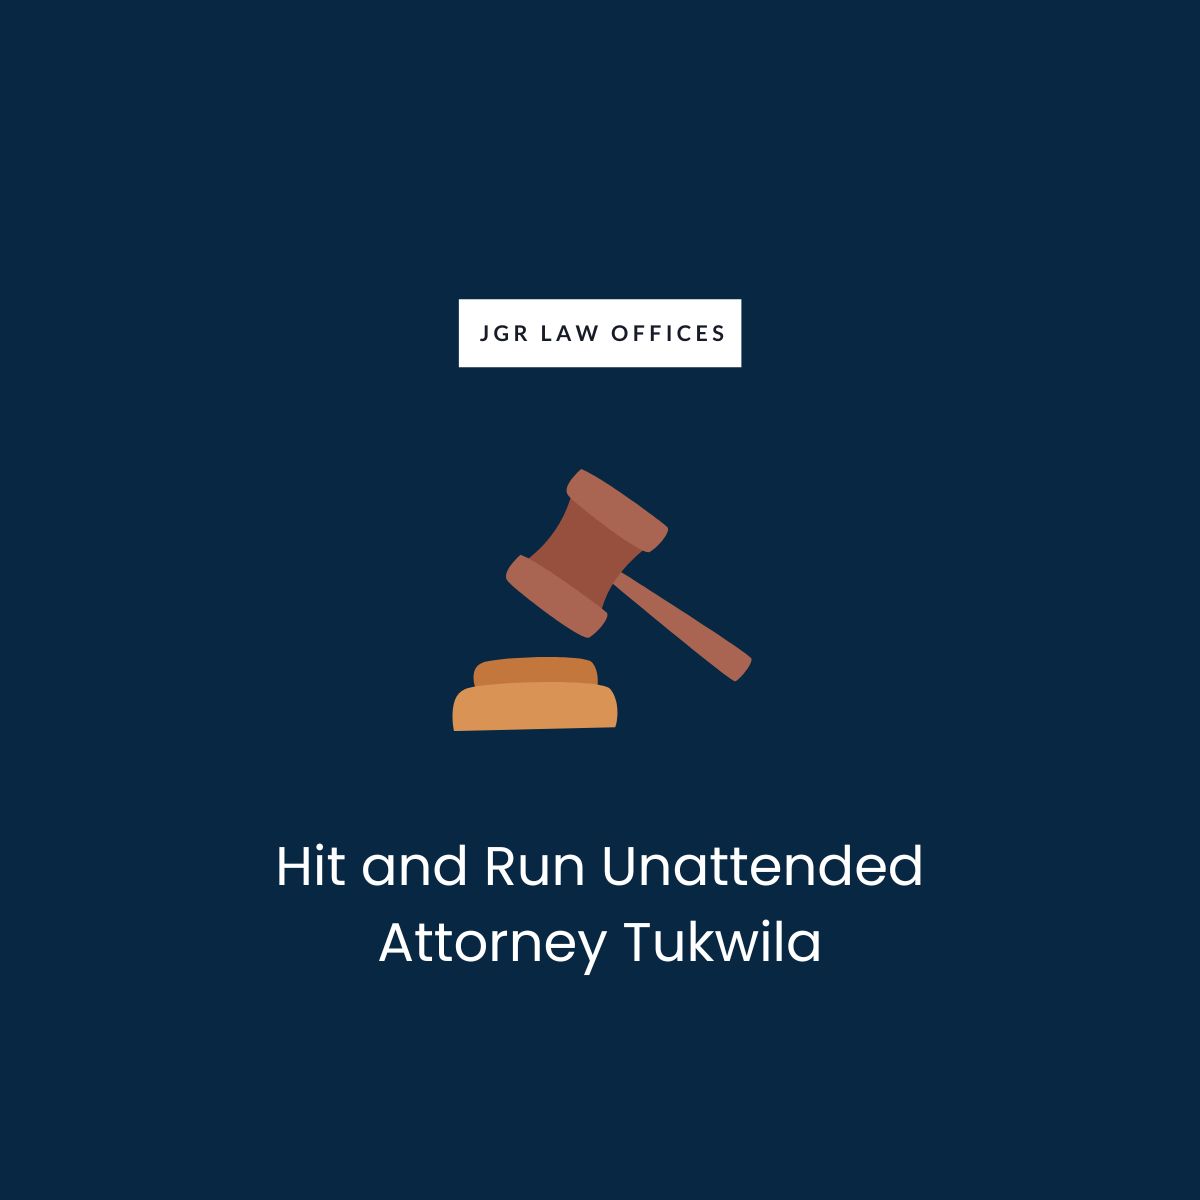 Hit and Run Unattended Attorney Tukwila Hit and Run Unattended